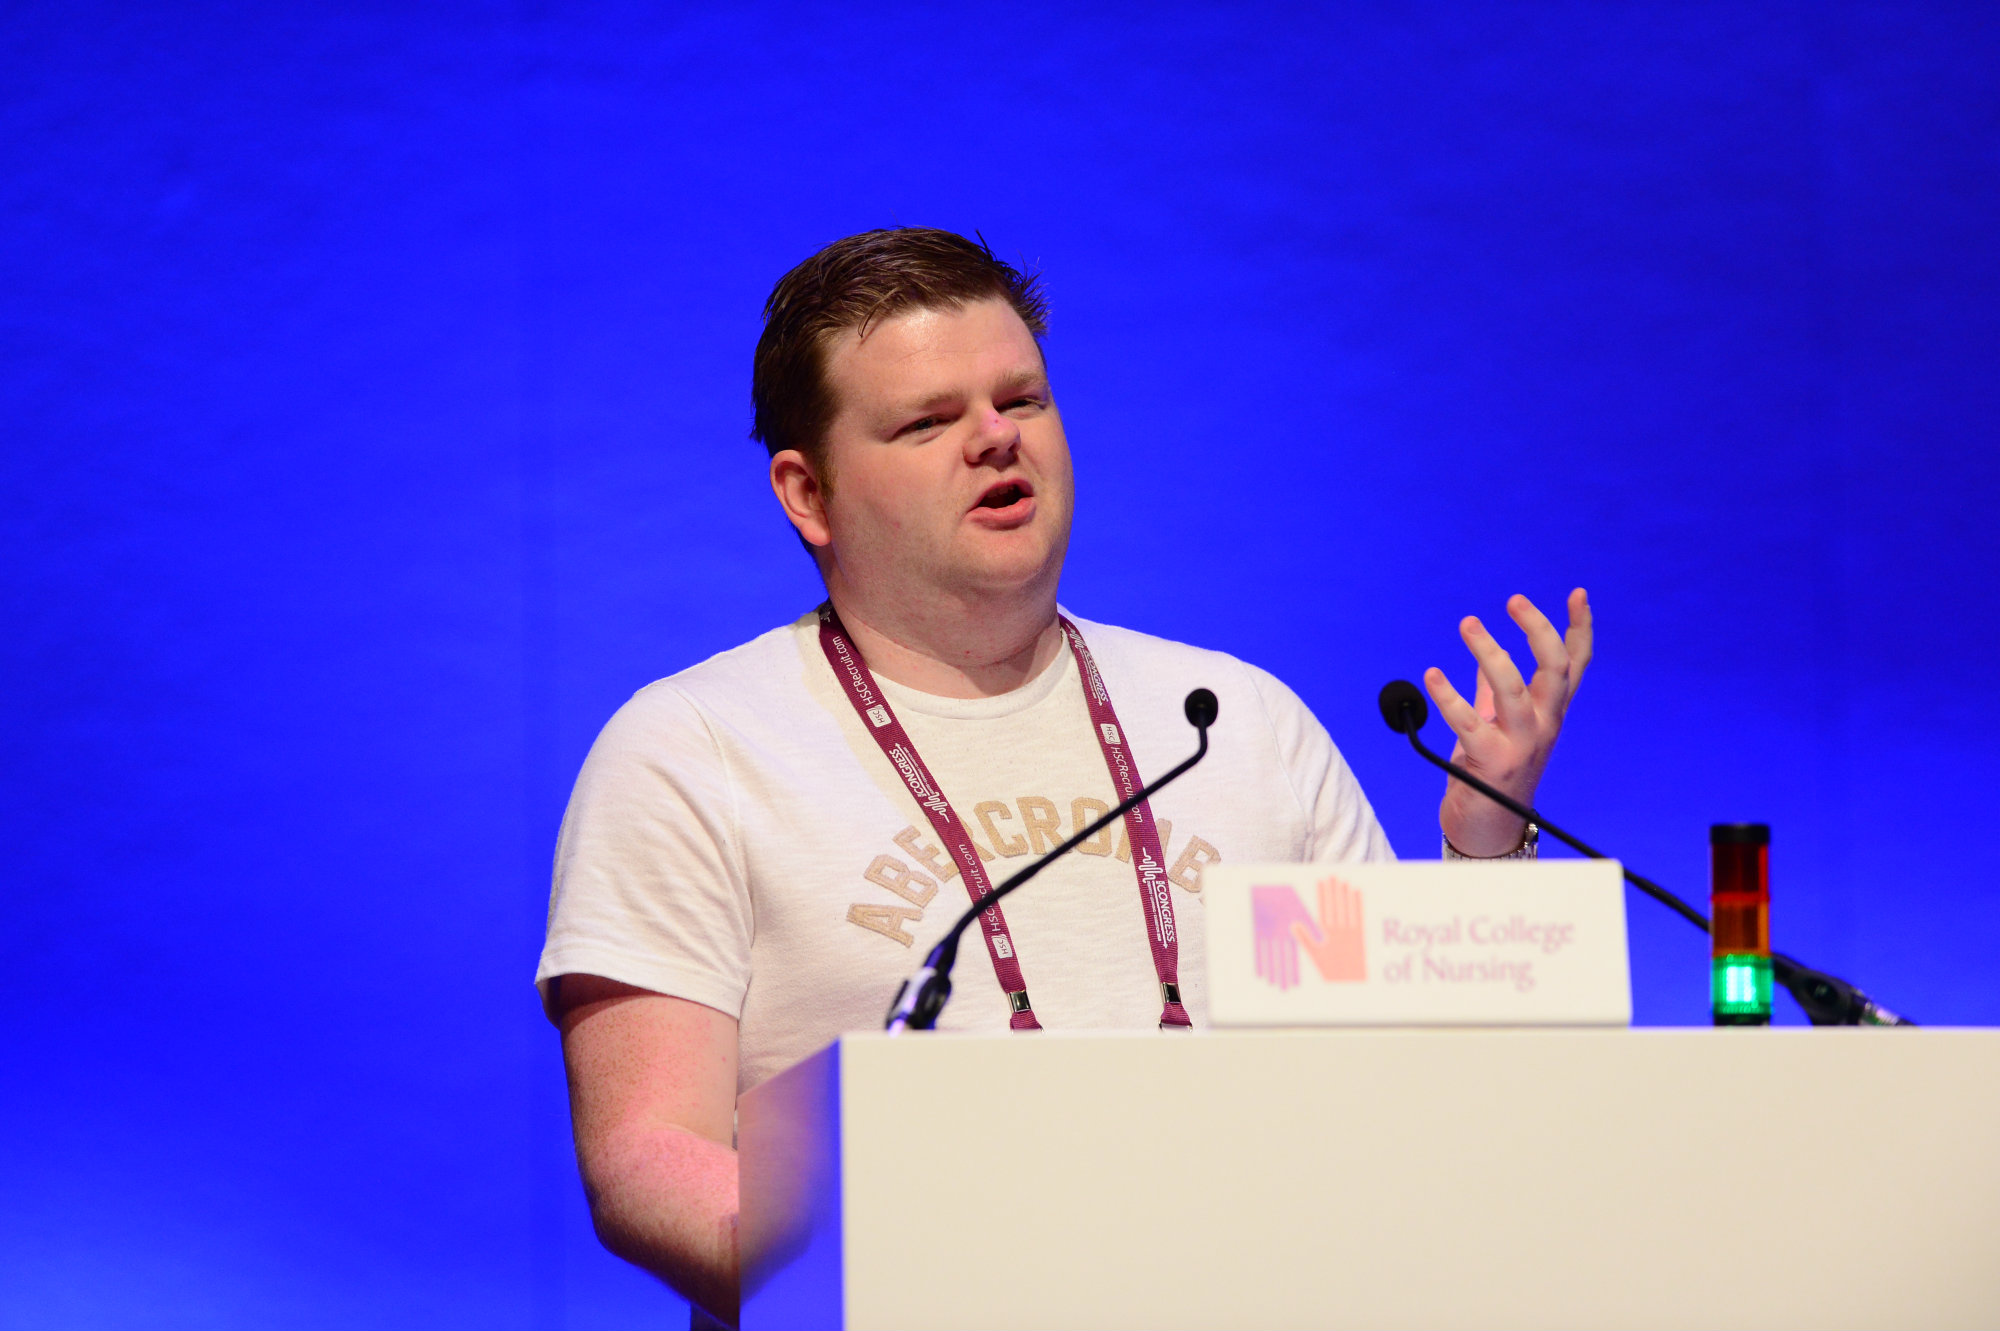 Anthony McGeown speaking at Congress 2018